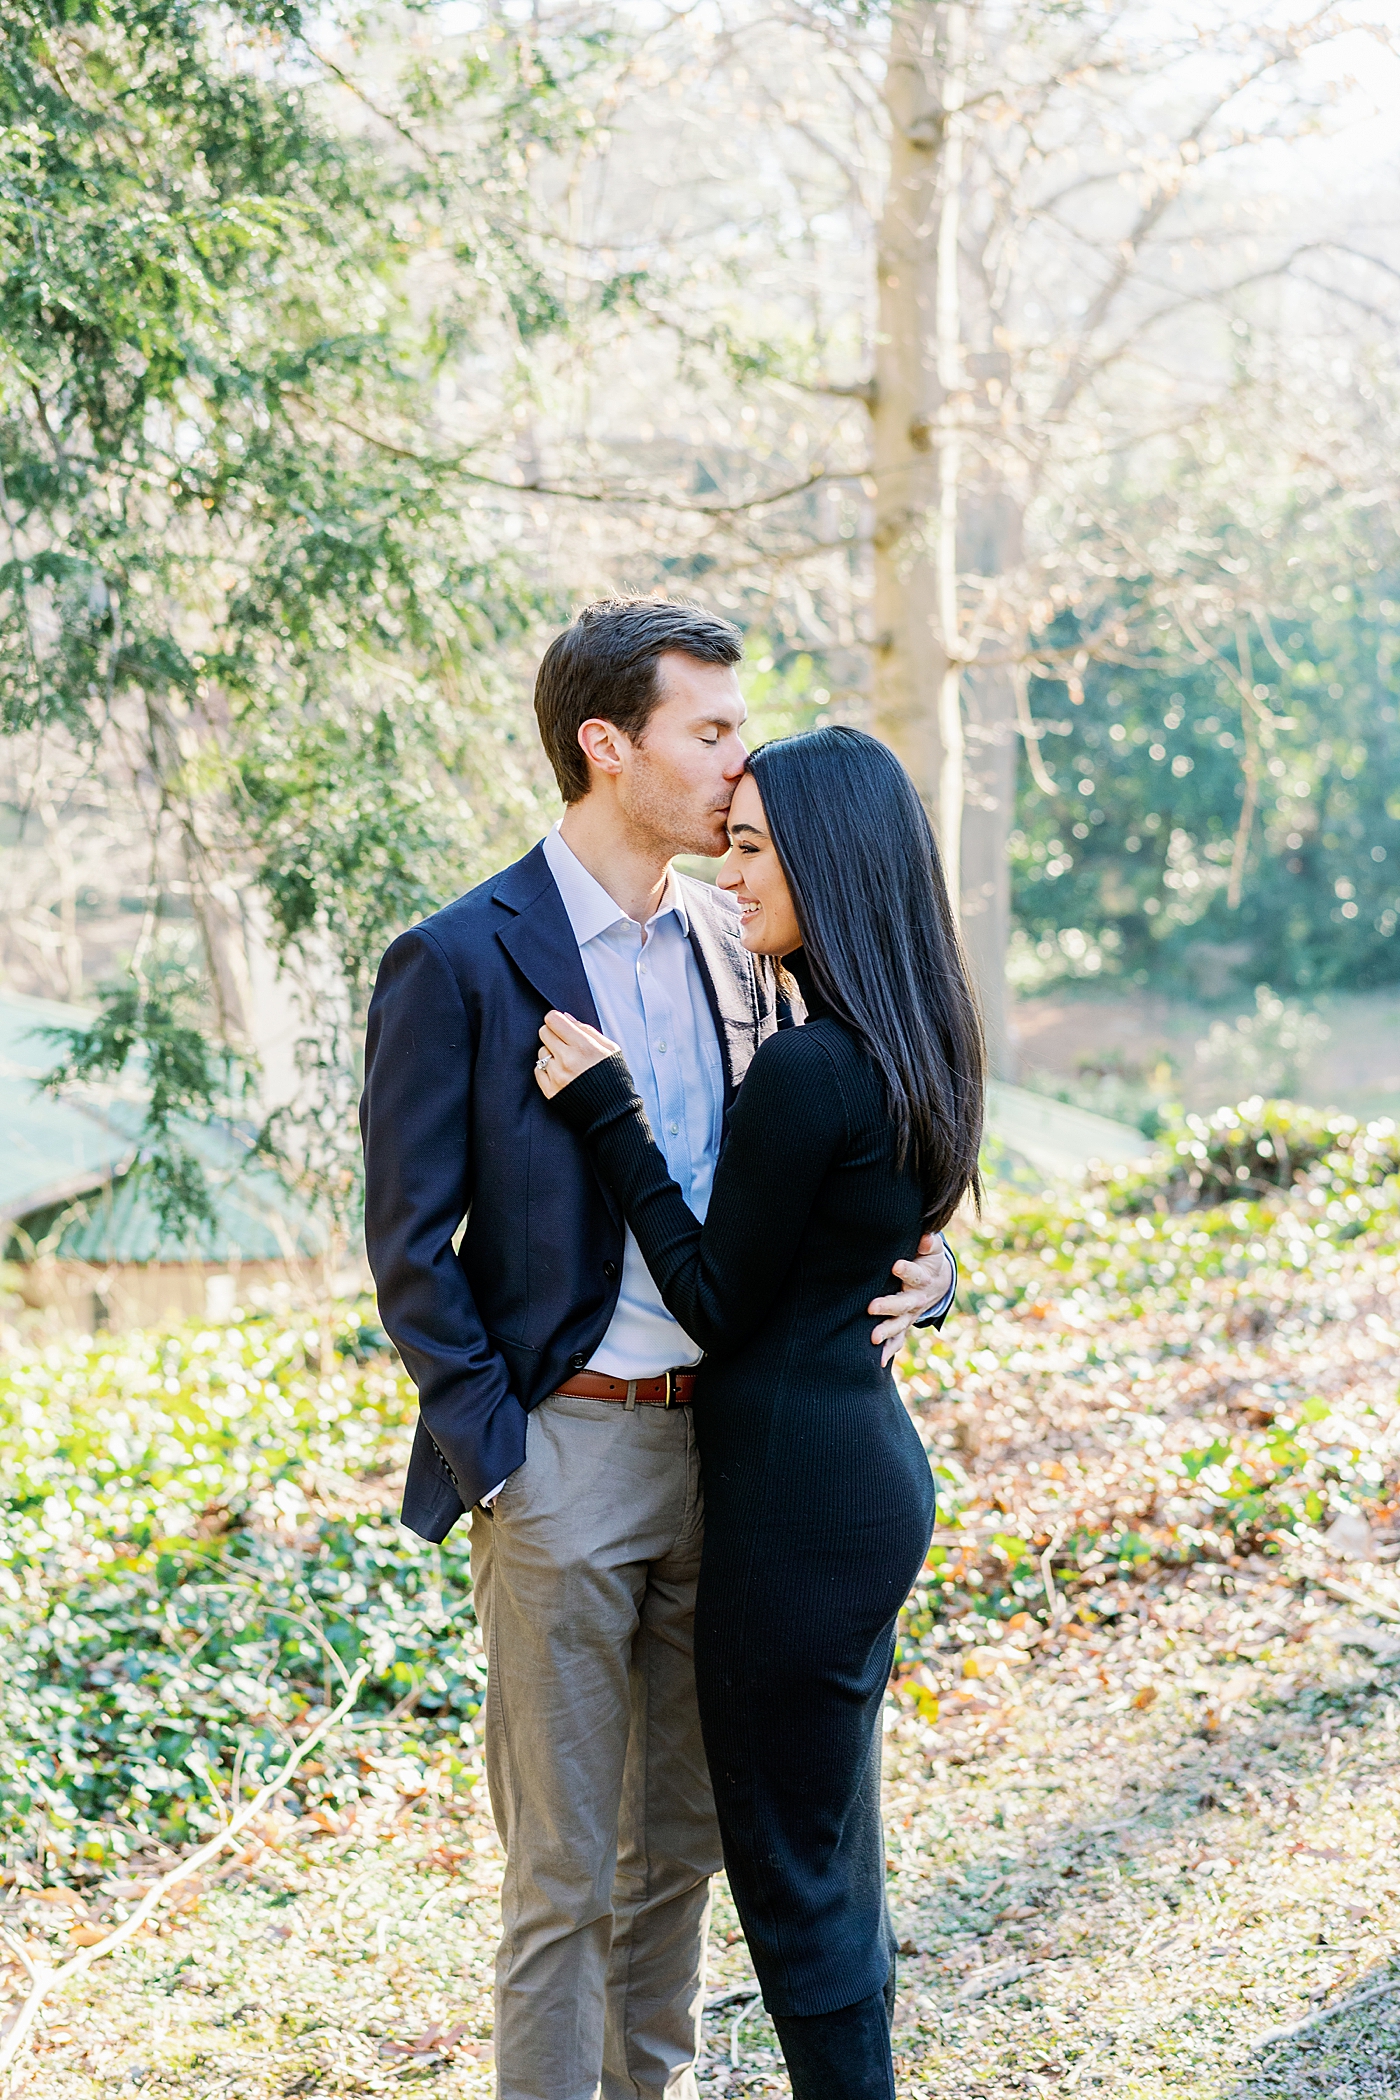 Engaged couple embracing during their Atlanta, GA Garden Engagement | Image by Annie Laura Photo